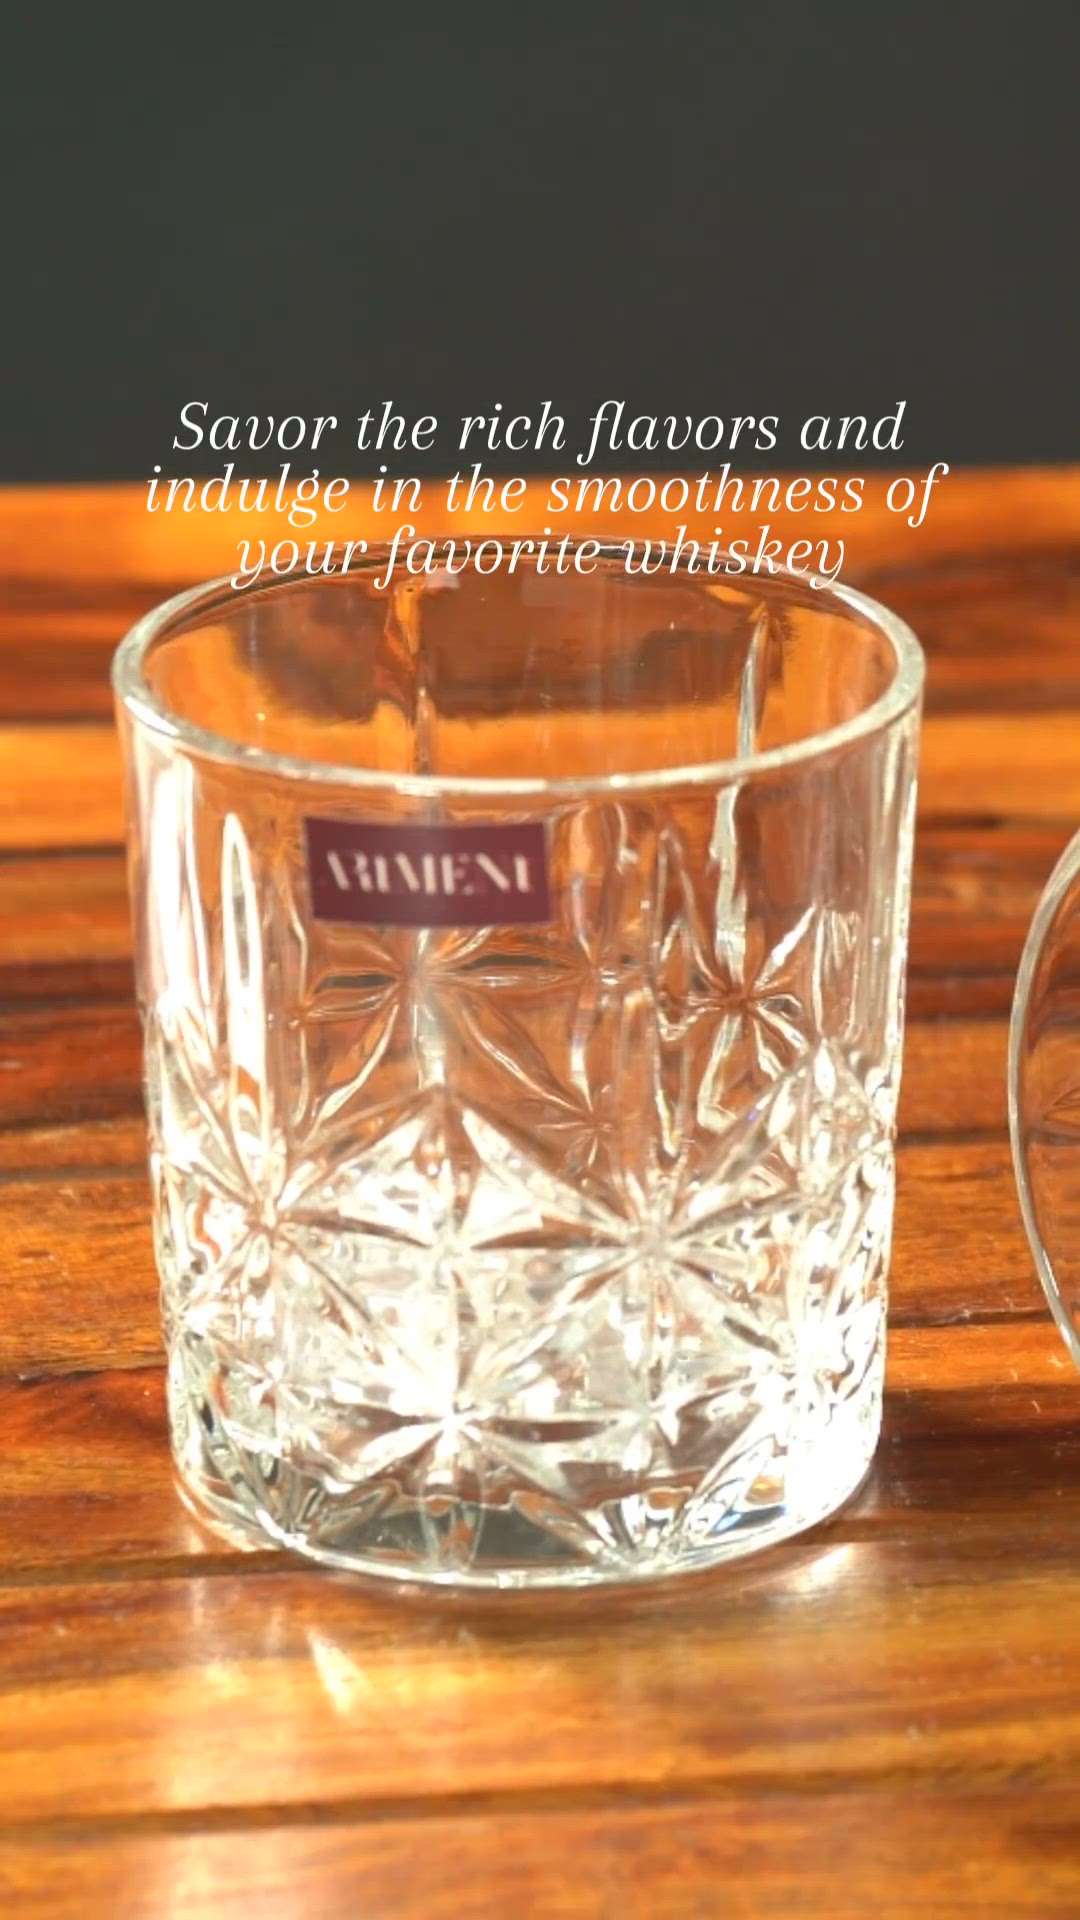 "Elevate your home bar with the allure of Carved Classics Whiskey Glasses. A symphony of taste and elegance."

#whiskey #art #kitchenware #kitchendecor #barware #bardecor #theartment #luxurious #decorshopping